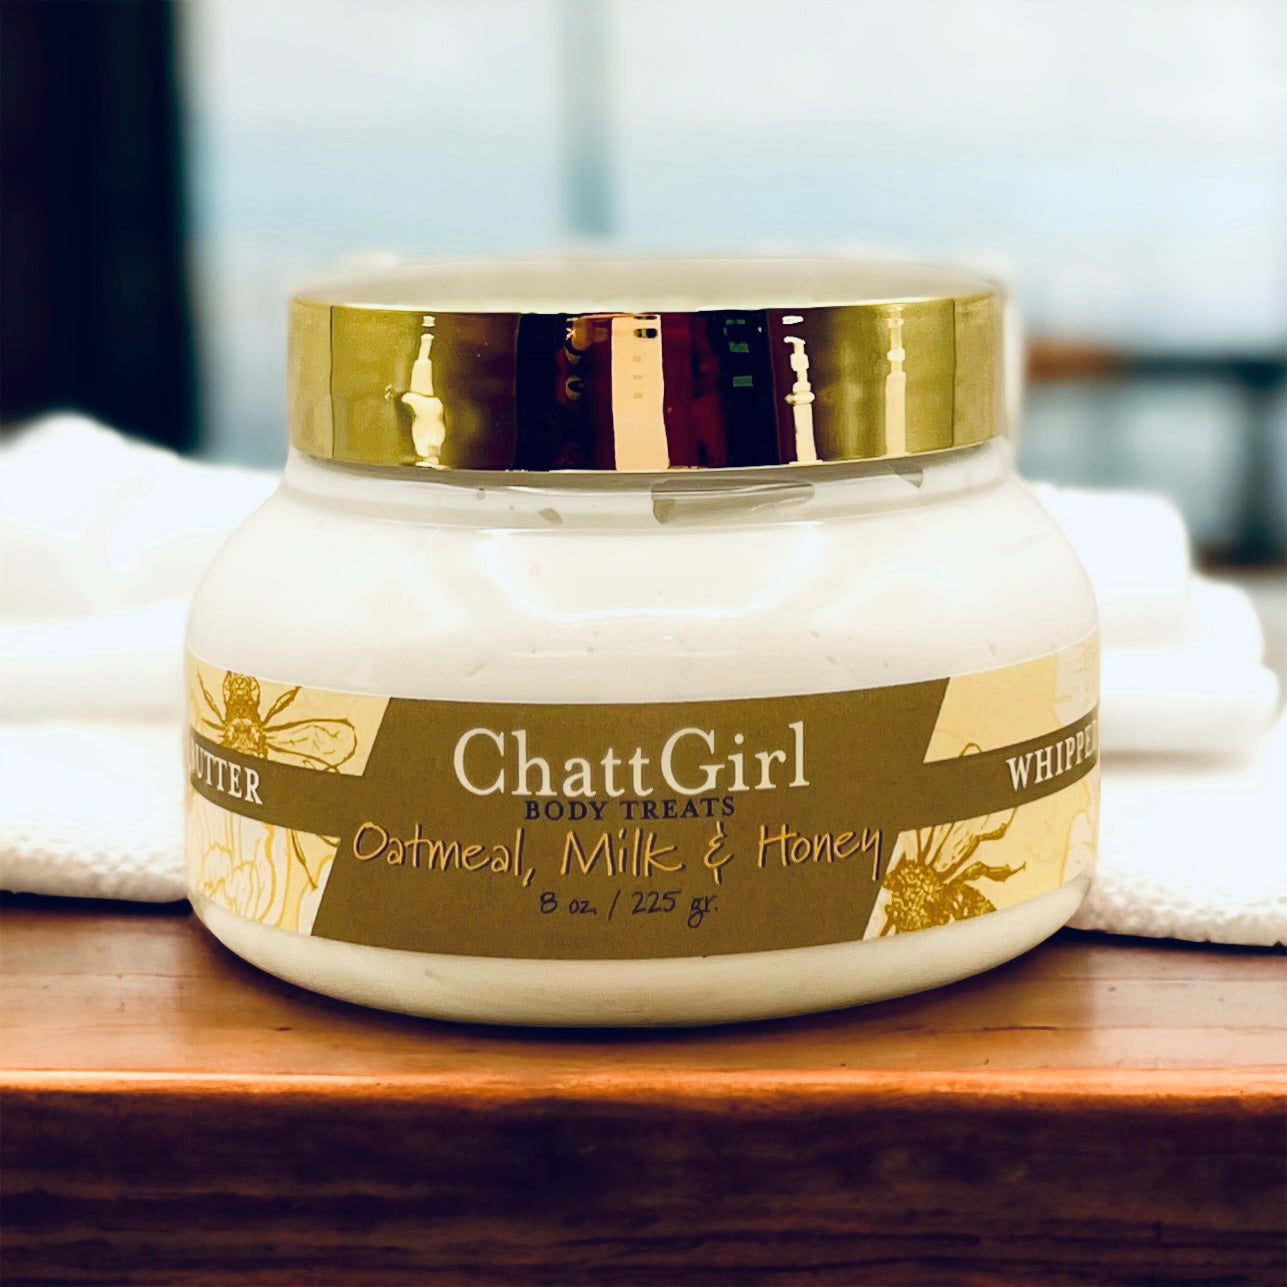 ChattGirl Body Treats Body Butter Made With Shea Butter & Babassu Oil